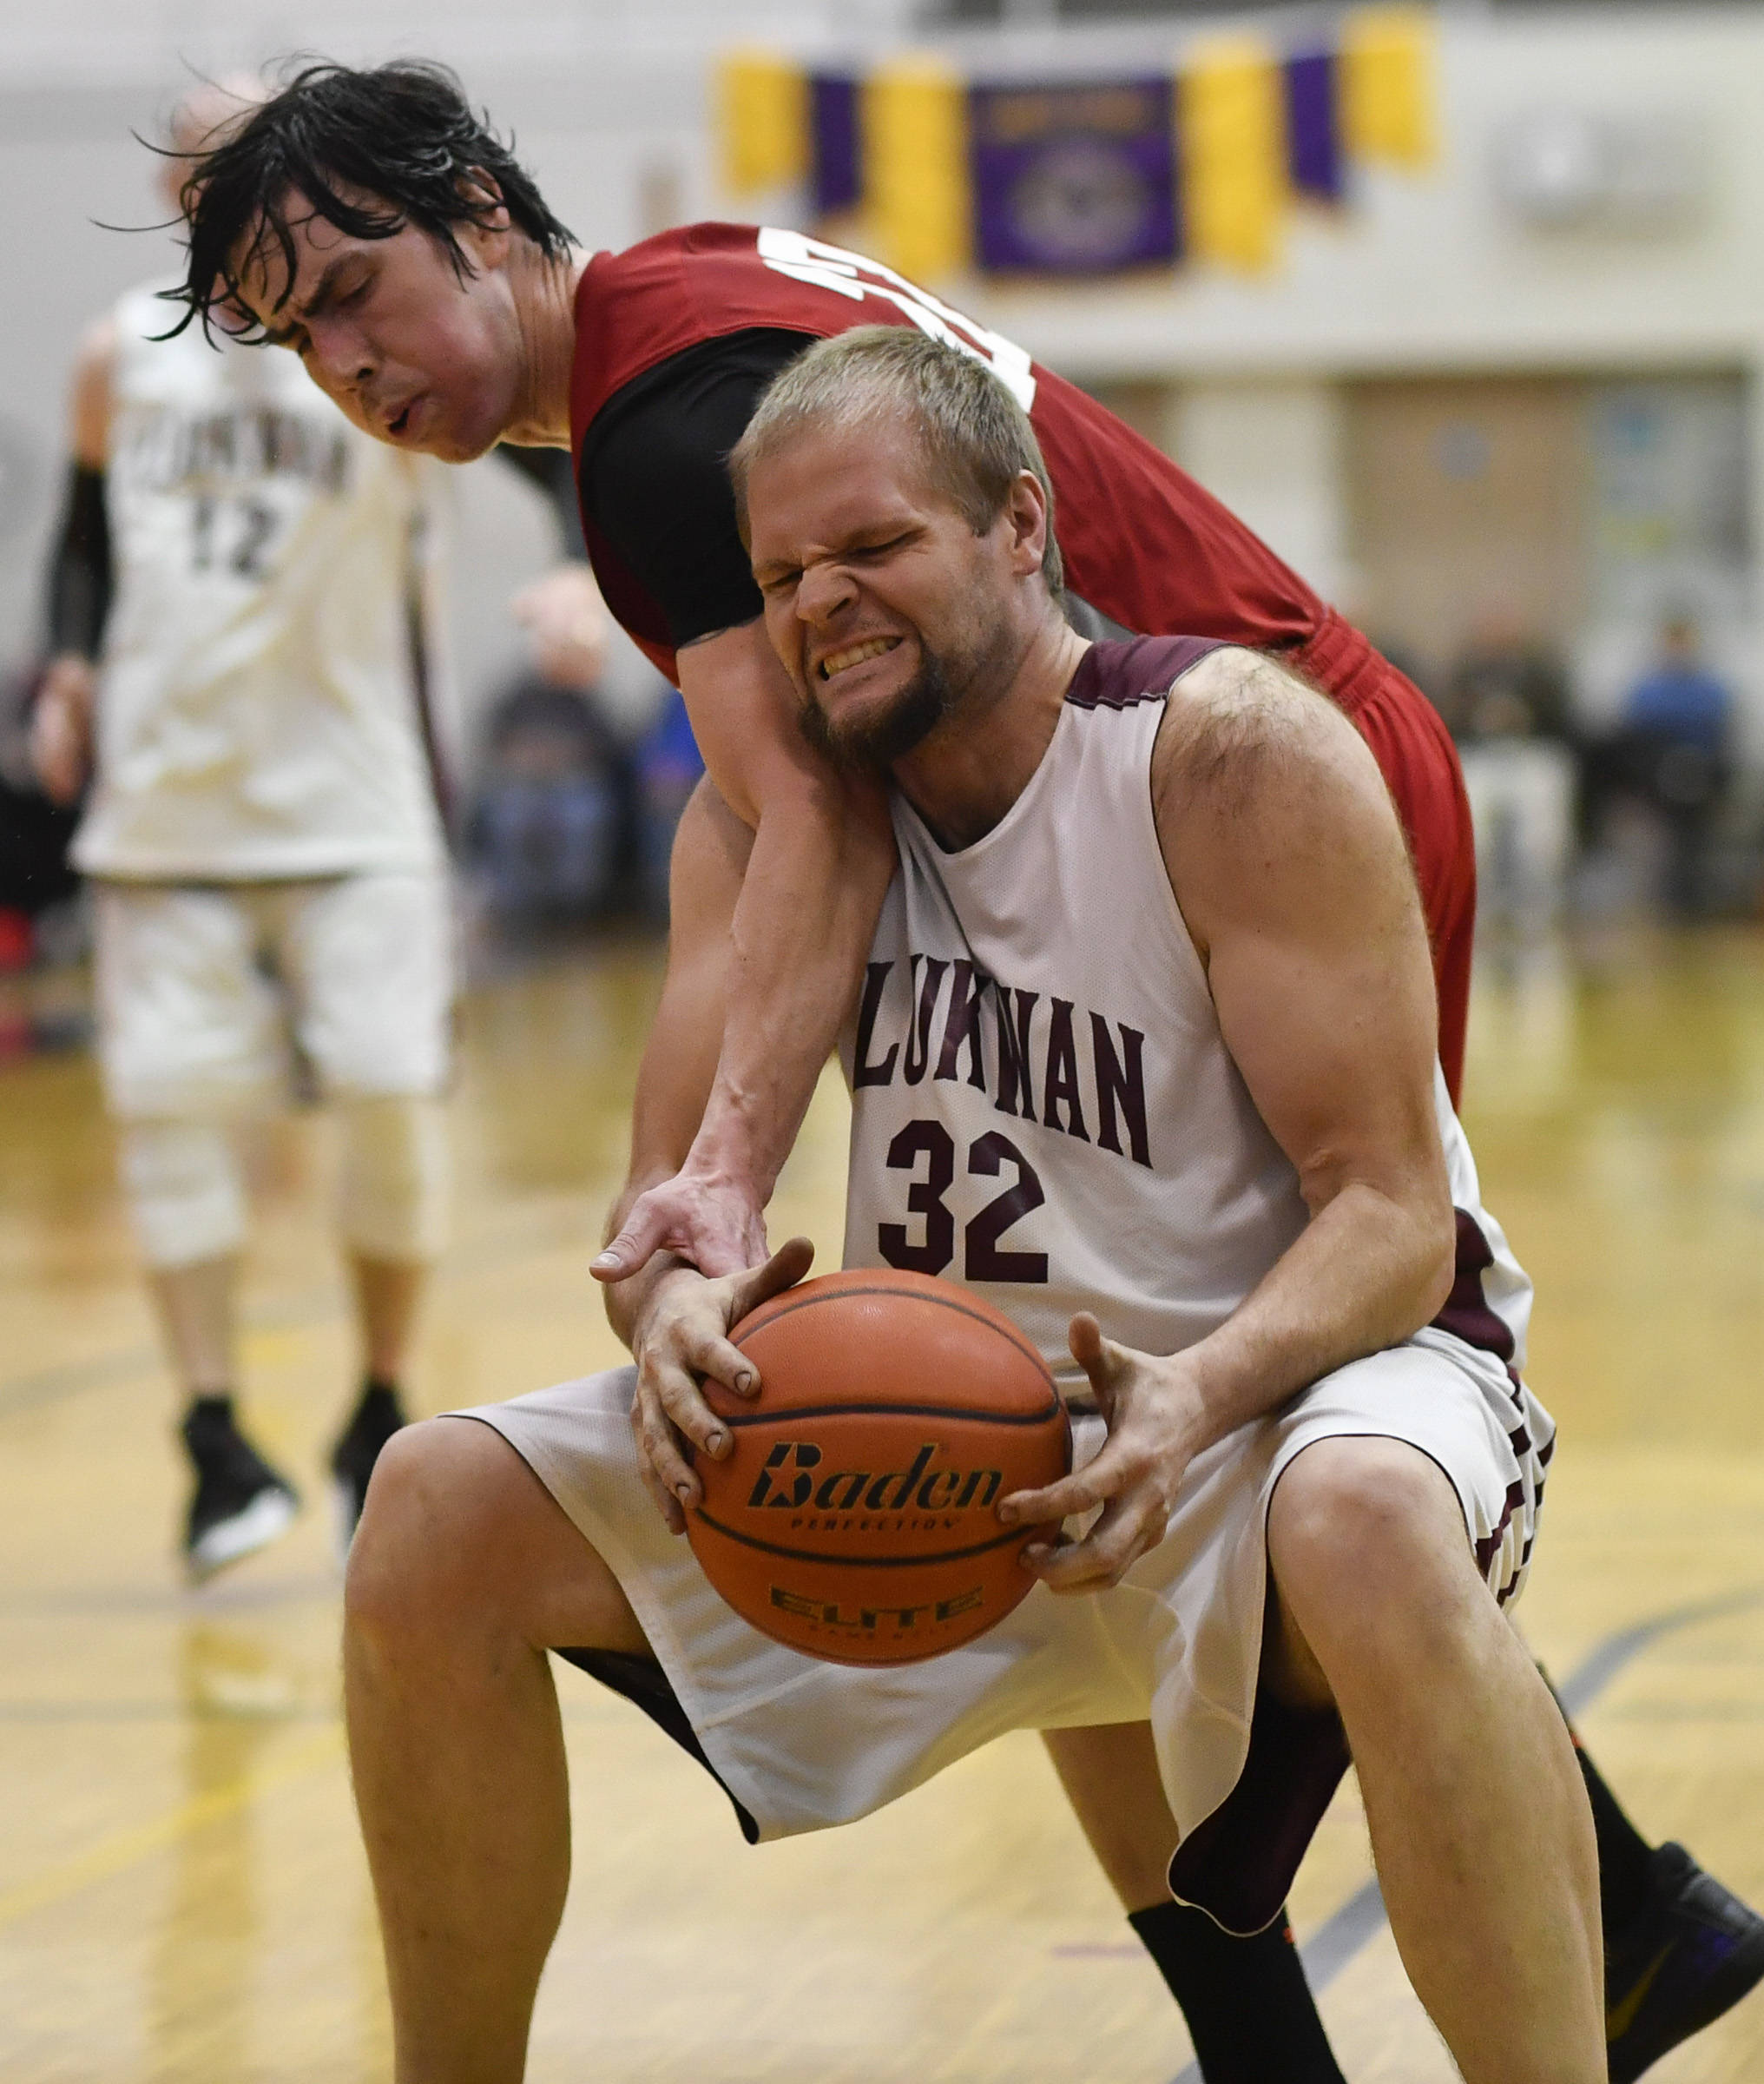 Hoonah’s Donald Dybdahl, left, attempts to get the ball from Klukwan’s Coleman Stanford during their C bracket game at the Juneau Lions Club 73rd Annual Gold Medal Basketball Tournament at Juneau-Douglas High School on Friday, March 22, 2019. Klukwan won 88-67. (Michael Penn | Juneau Empire)